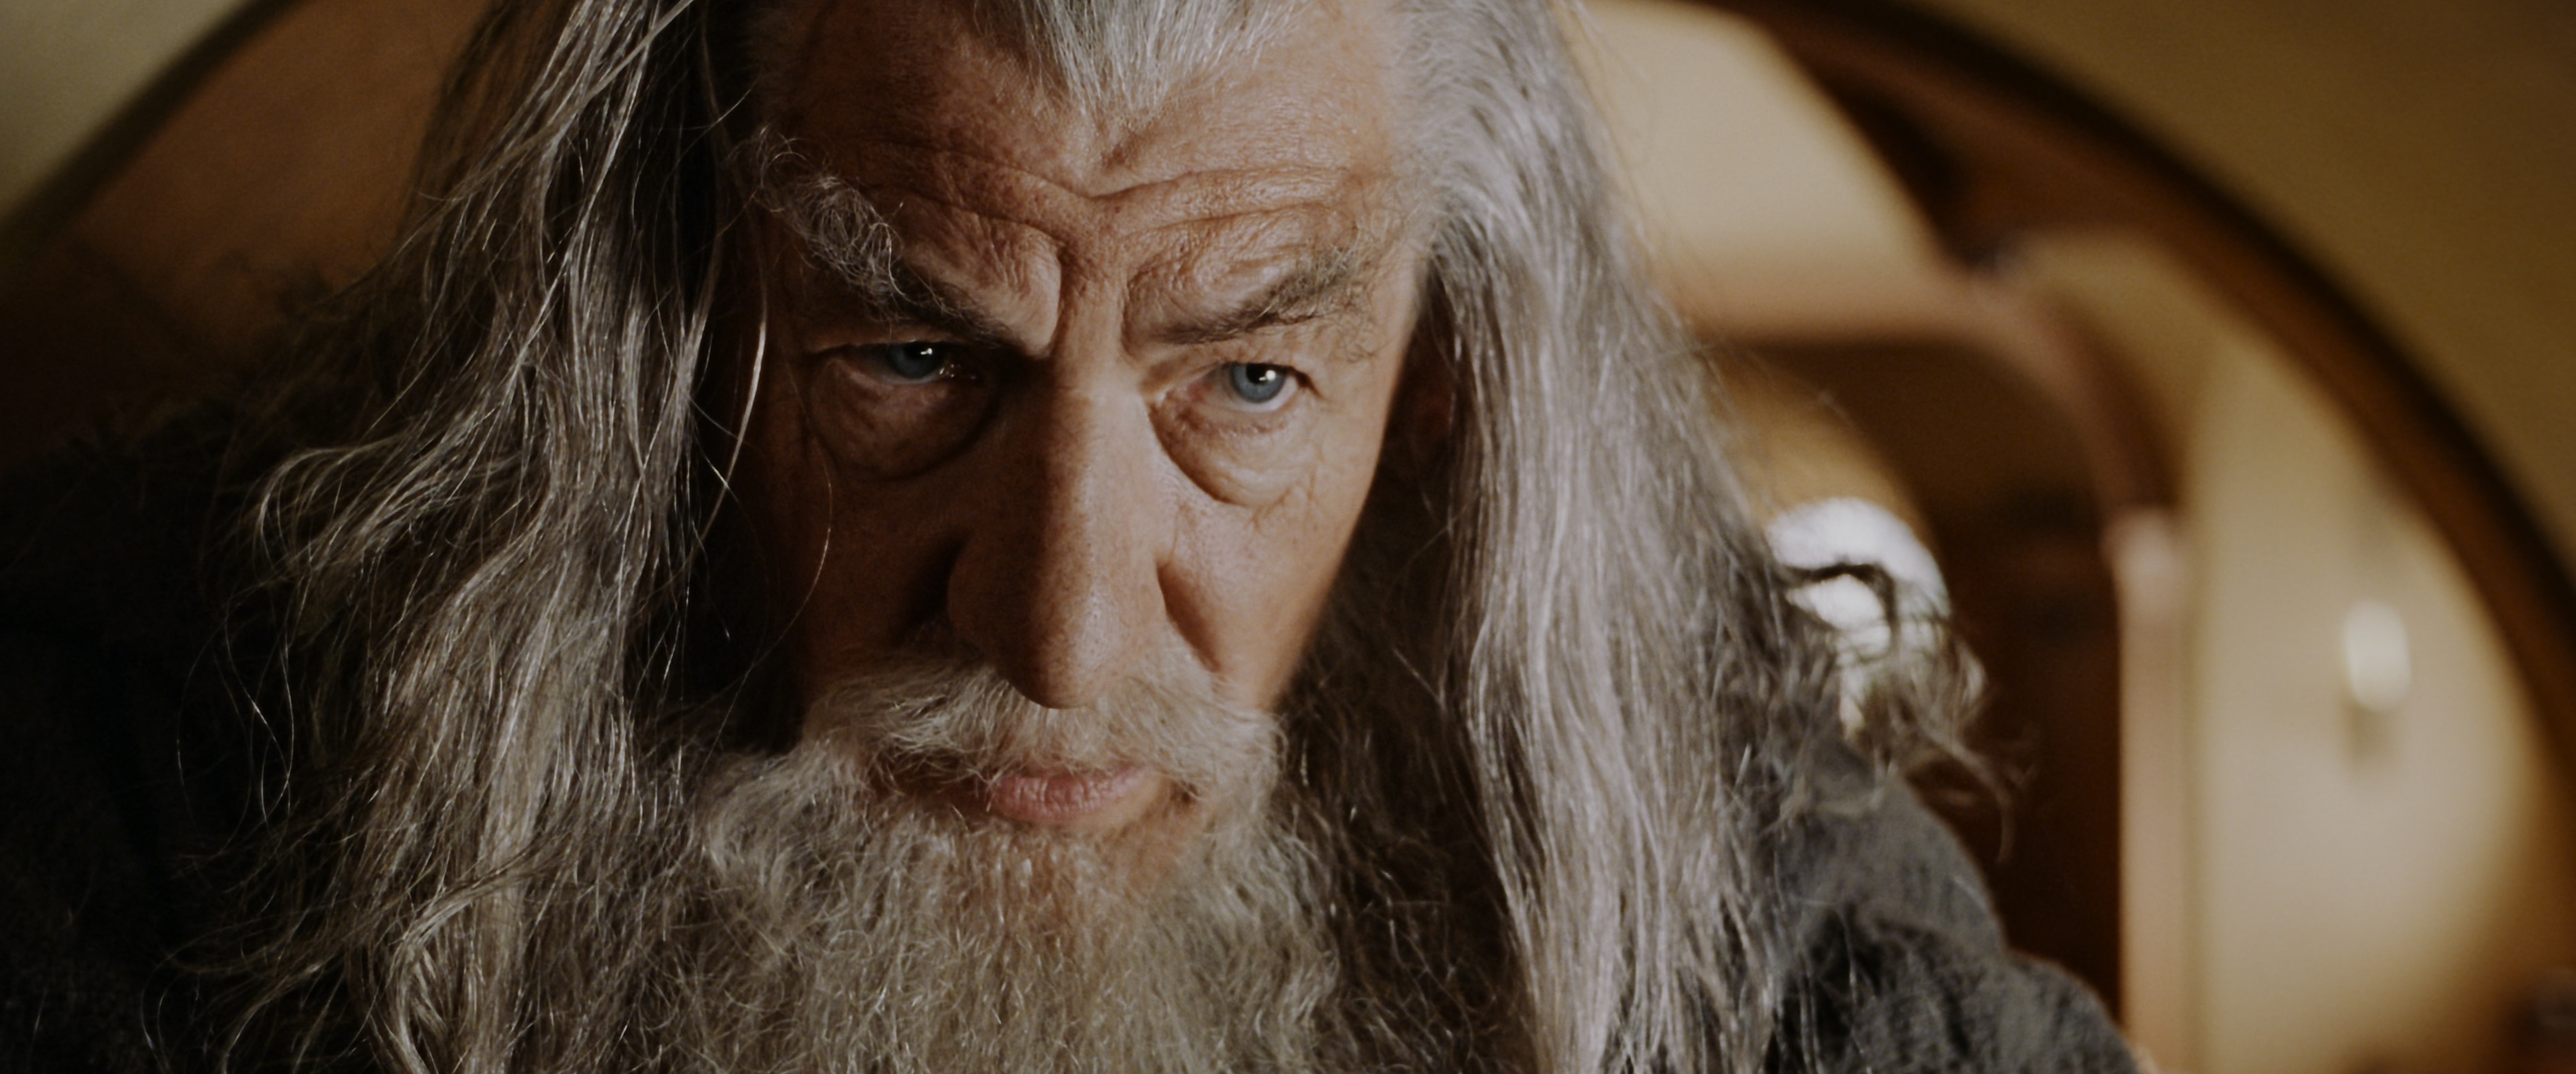 Gandalf in close up in Bilbo’s house in the shire in Fellowship of the Ring Lord of the Rings